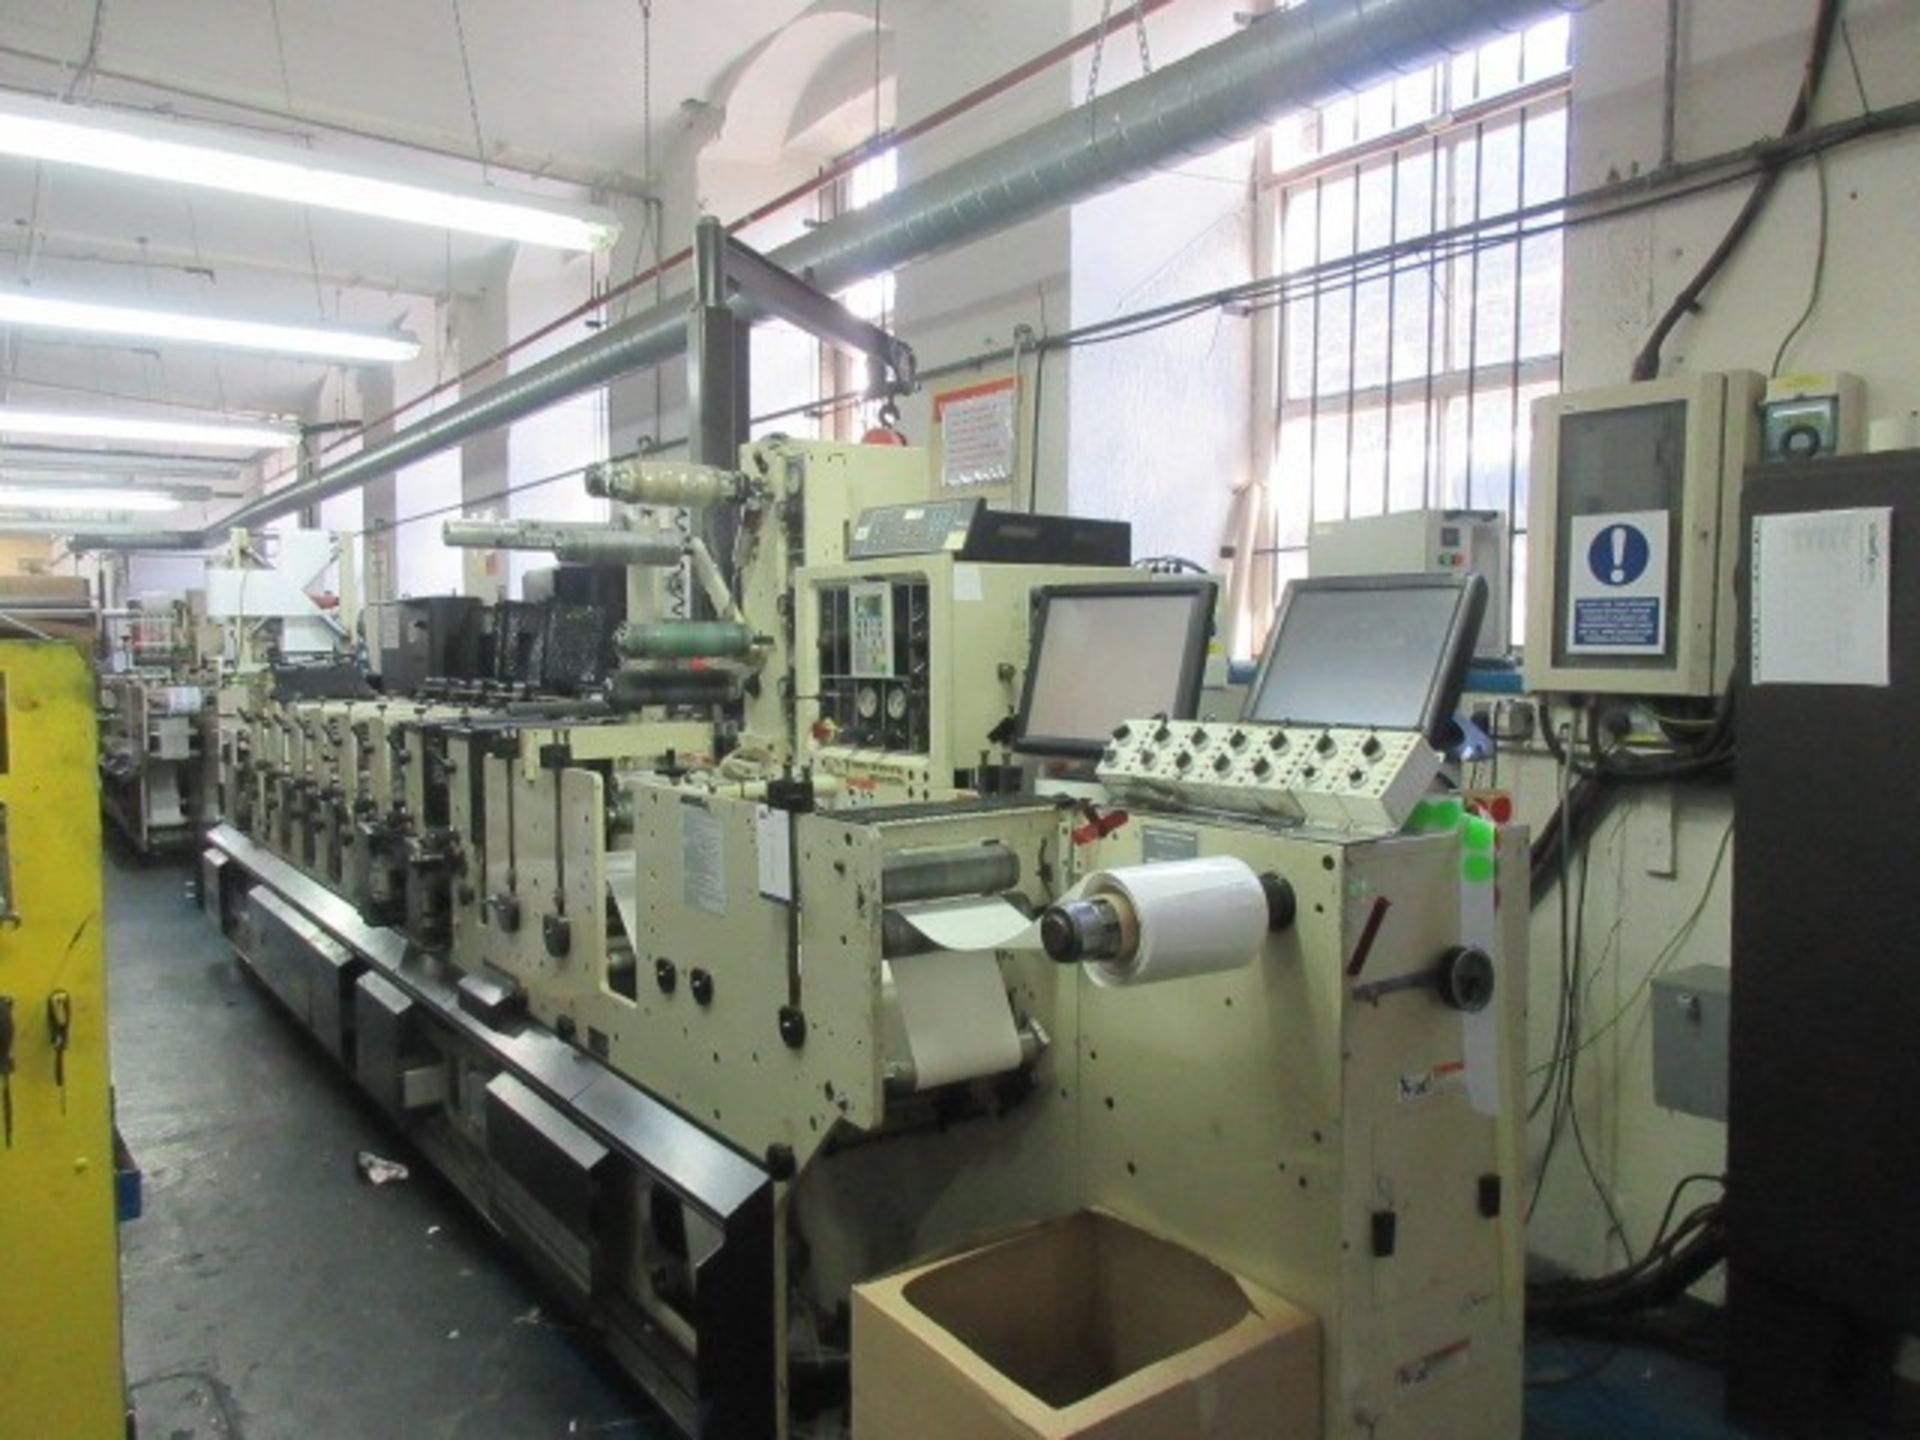 Mark Andy 2200-10F 10” 8 colour flexographic label printing press. Serial no: 1260086 (2002) - Image 135 of 383